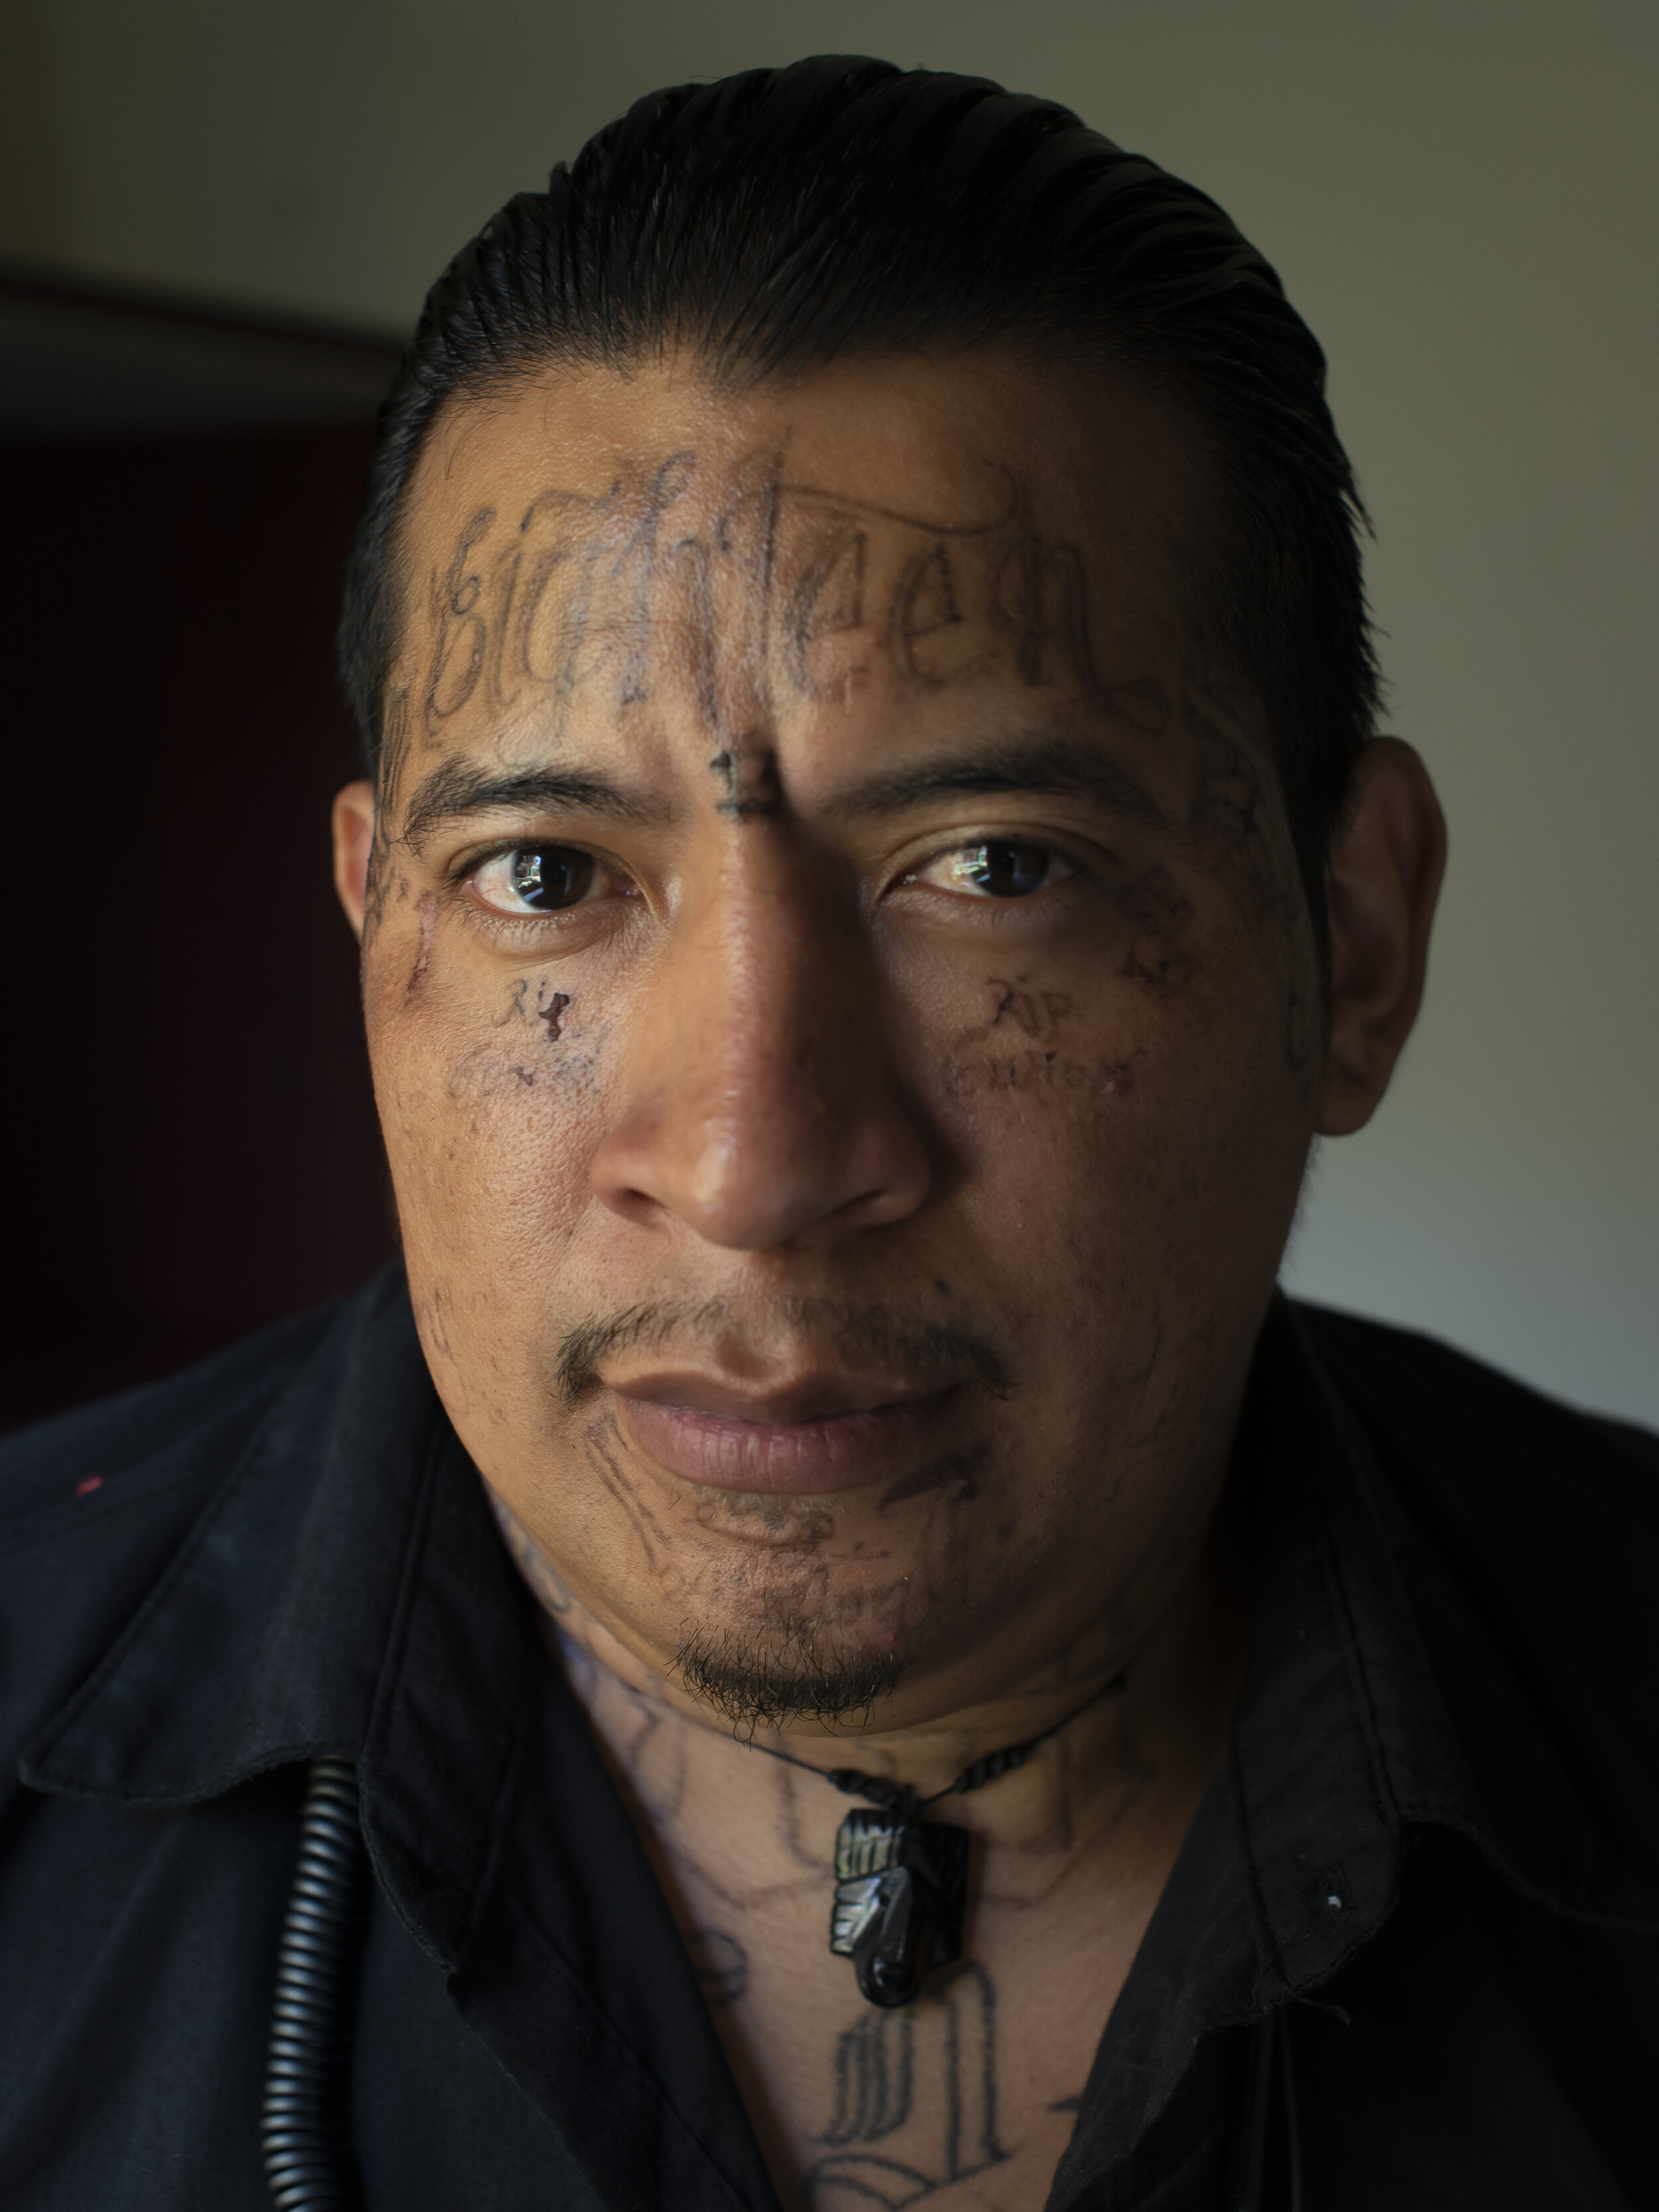  Melvin Eduardo Martinez Melara, a former Barrio 18 gang member. While serving a prison sentence he decided to leave gang life after 14 years of crime. Since then, he has been living with an organization in San Salvador that helps reform gang members